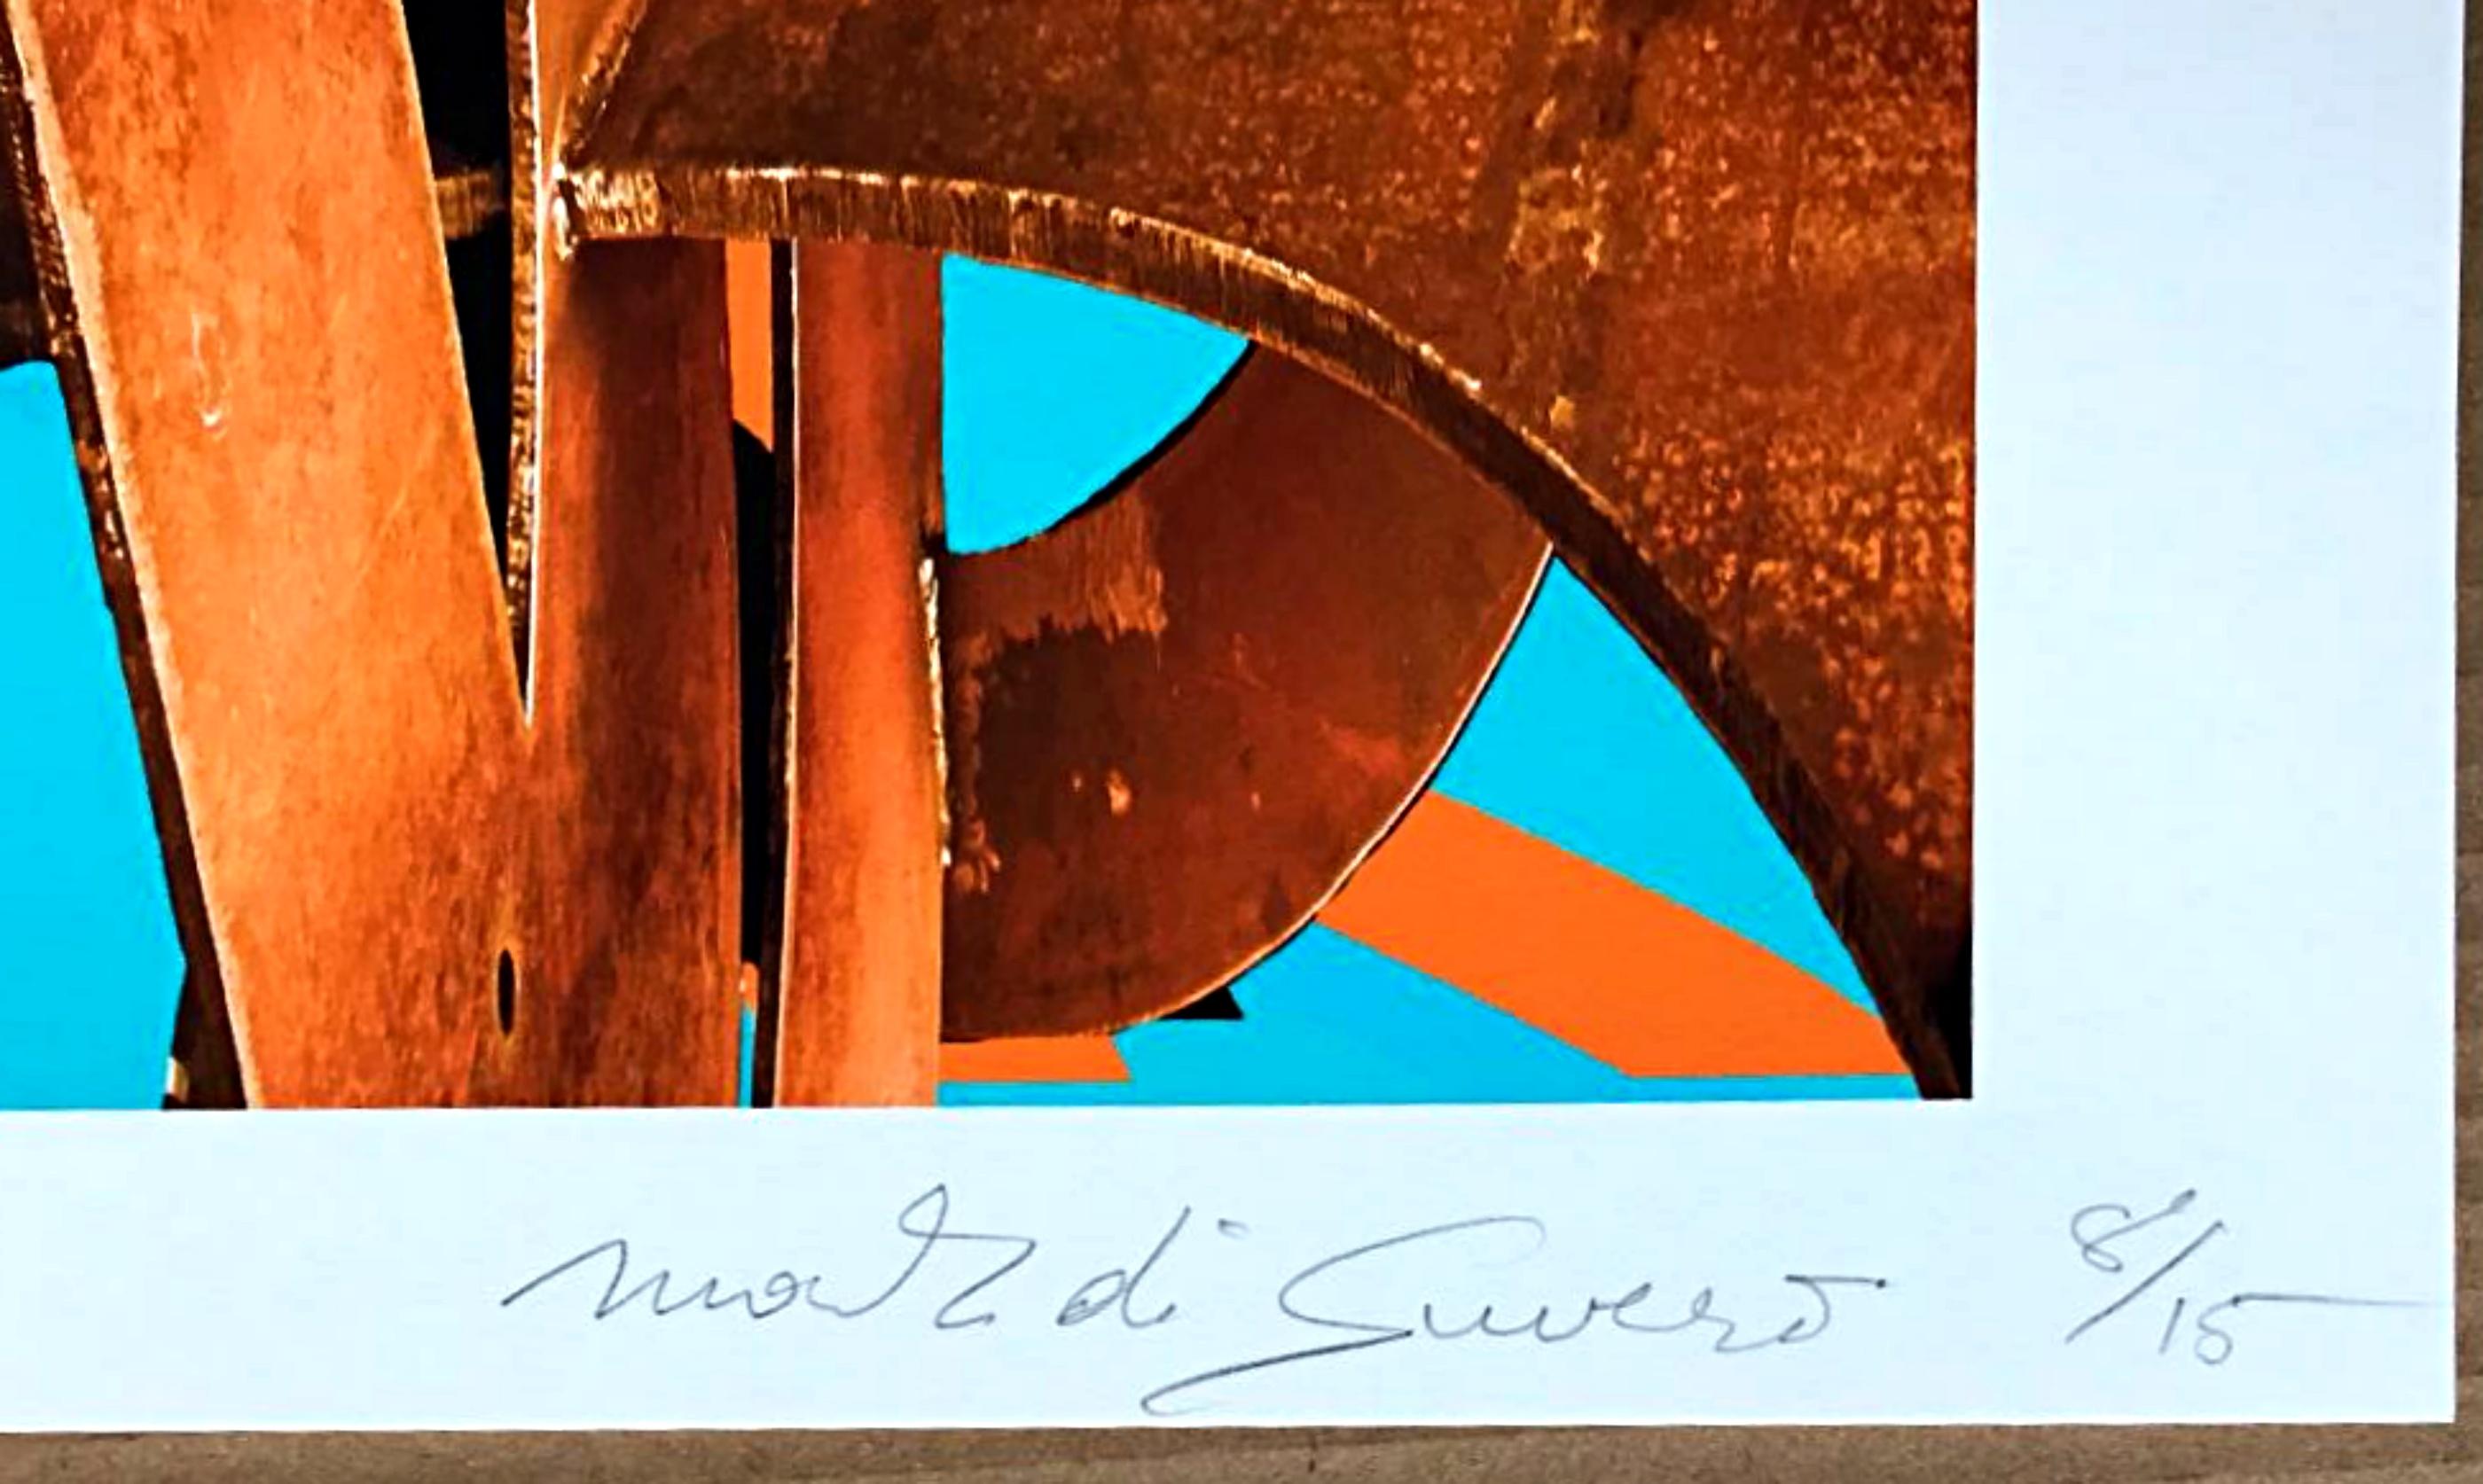 Papillon, signed Abstract Expressionist print Lt of only 15 by renowned sculptor - Print by Mark di Suvero